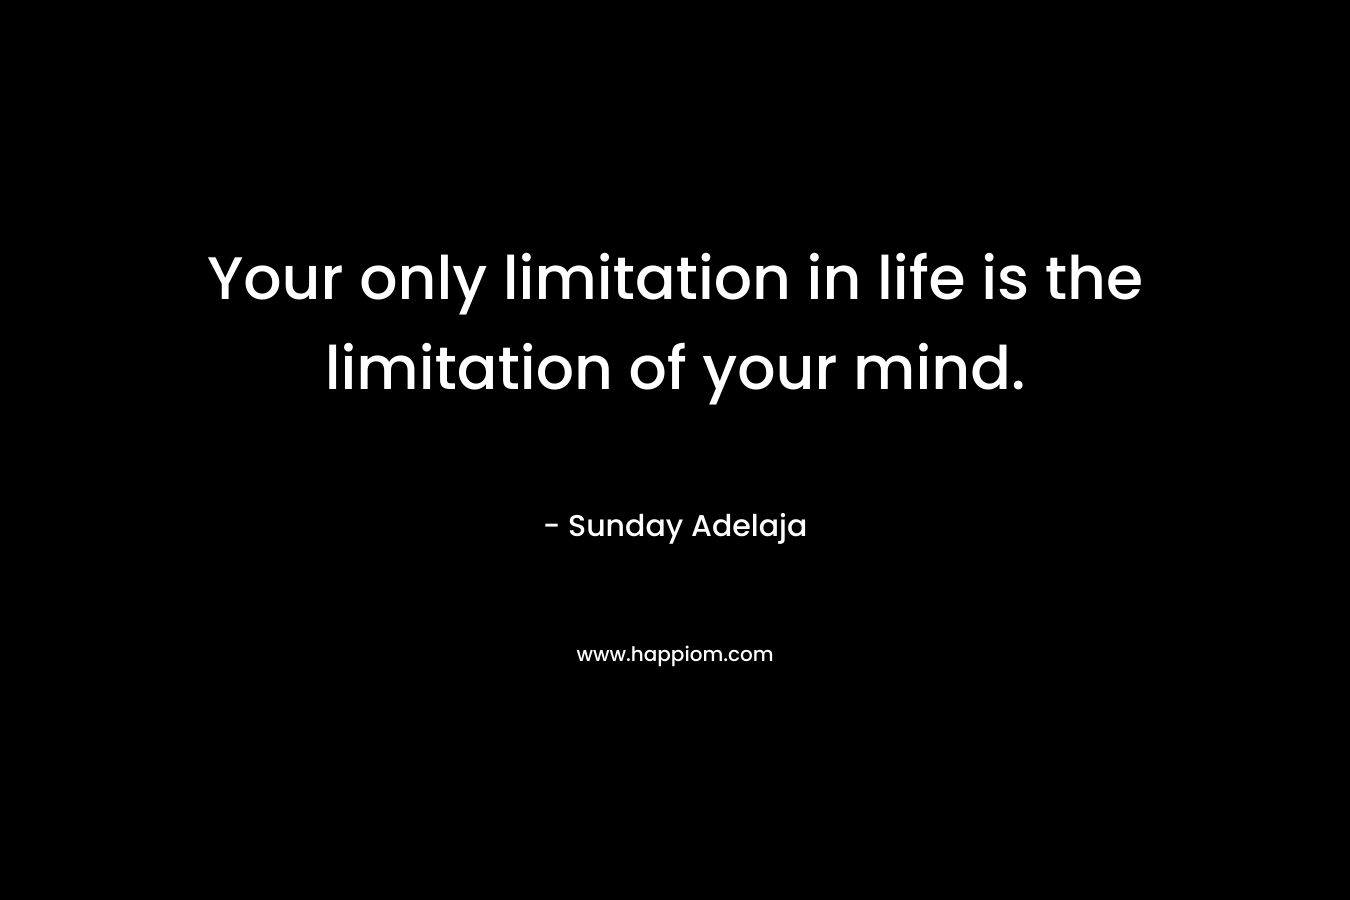 Your only limitation in life is the limitation of your mind.